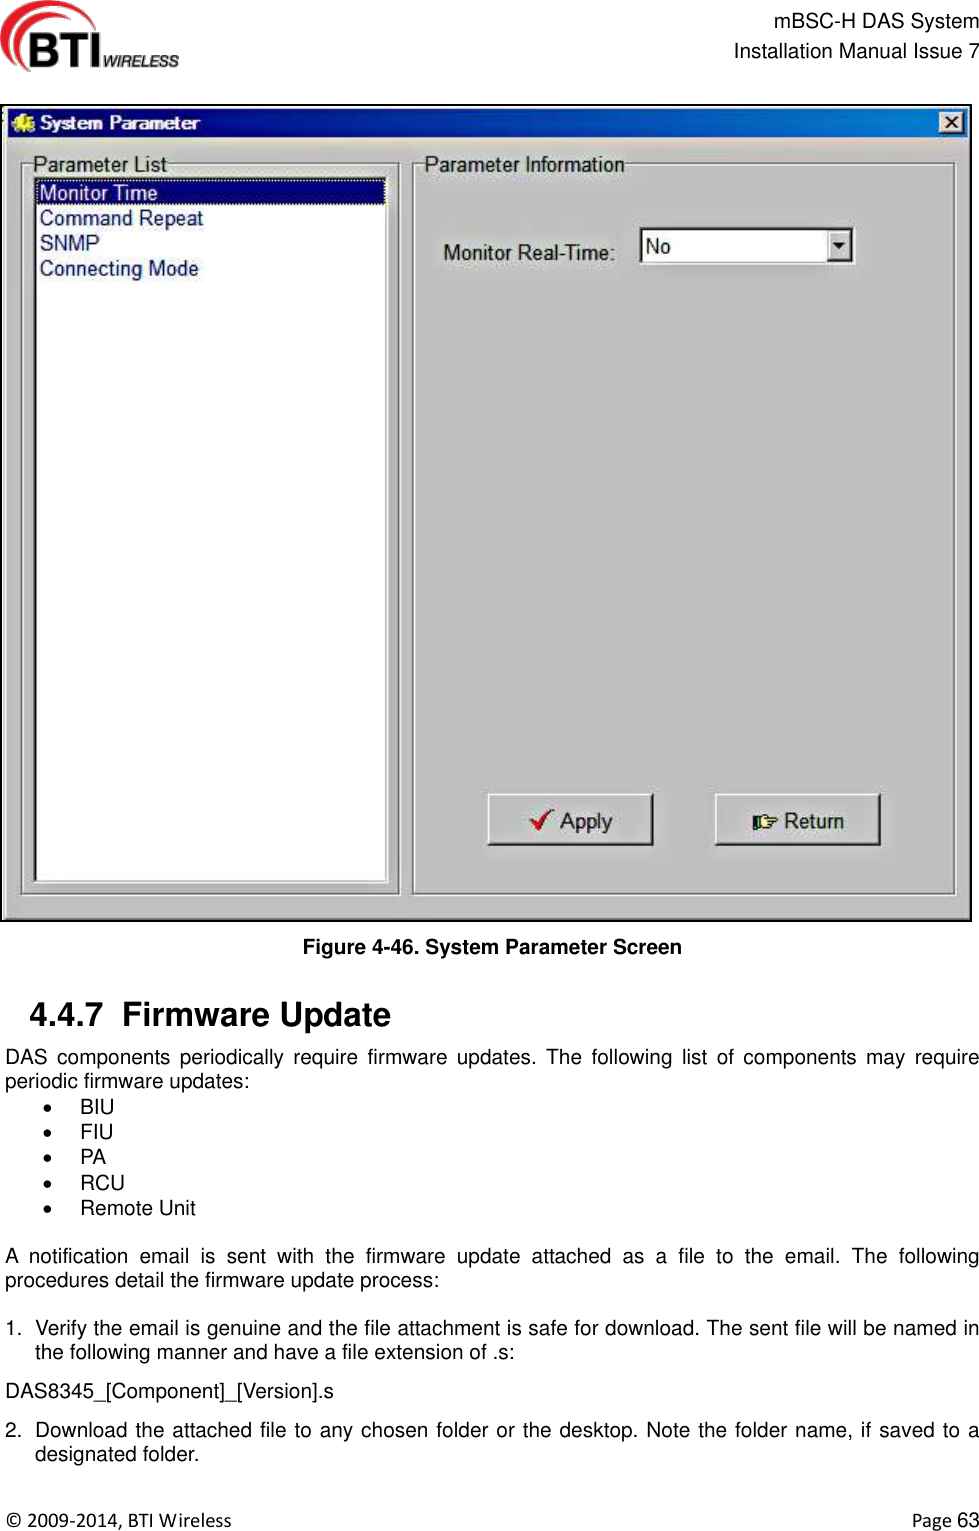                                                   mBSC-H DAS System   Installation Manual Issue 7  ©  2009-2014, BTI Wireless    Page 63  Figure 4-46. System Parameter Screen   4.4.7  Firmware Update   DAS  components  periodically  require  firmware  updates.  The  following  list  of  components  may  require periodic firmware updates:  BIU   FIU  PA   RCU   Remote Unit    A  notification  email  is  sent  with  the  firmware  update  attached  as  a  file  to  the  email.  The  following procedures detail the firmware update process:  1.  Verify the email is genuine and the file attachment is safe for download. The sent file will be named in the following manner and have a file extension of .s: DAS8345_[Component]_[Version].s 2.  Download the attached file to any chosen folder or the desktop. Note the folder name, if saved to a designated folder. 